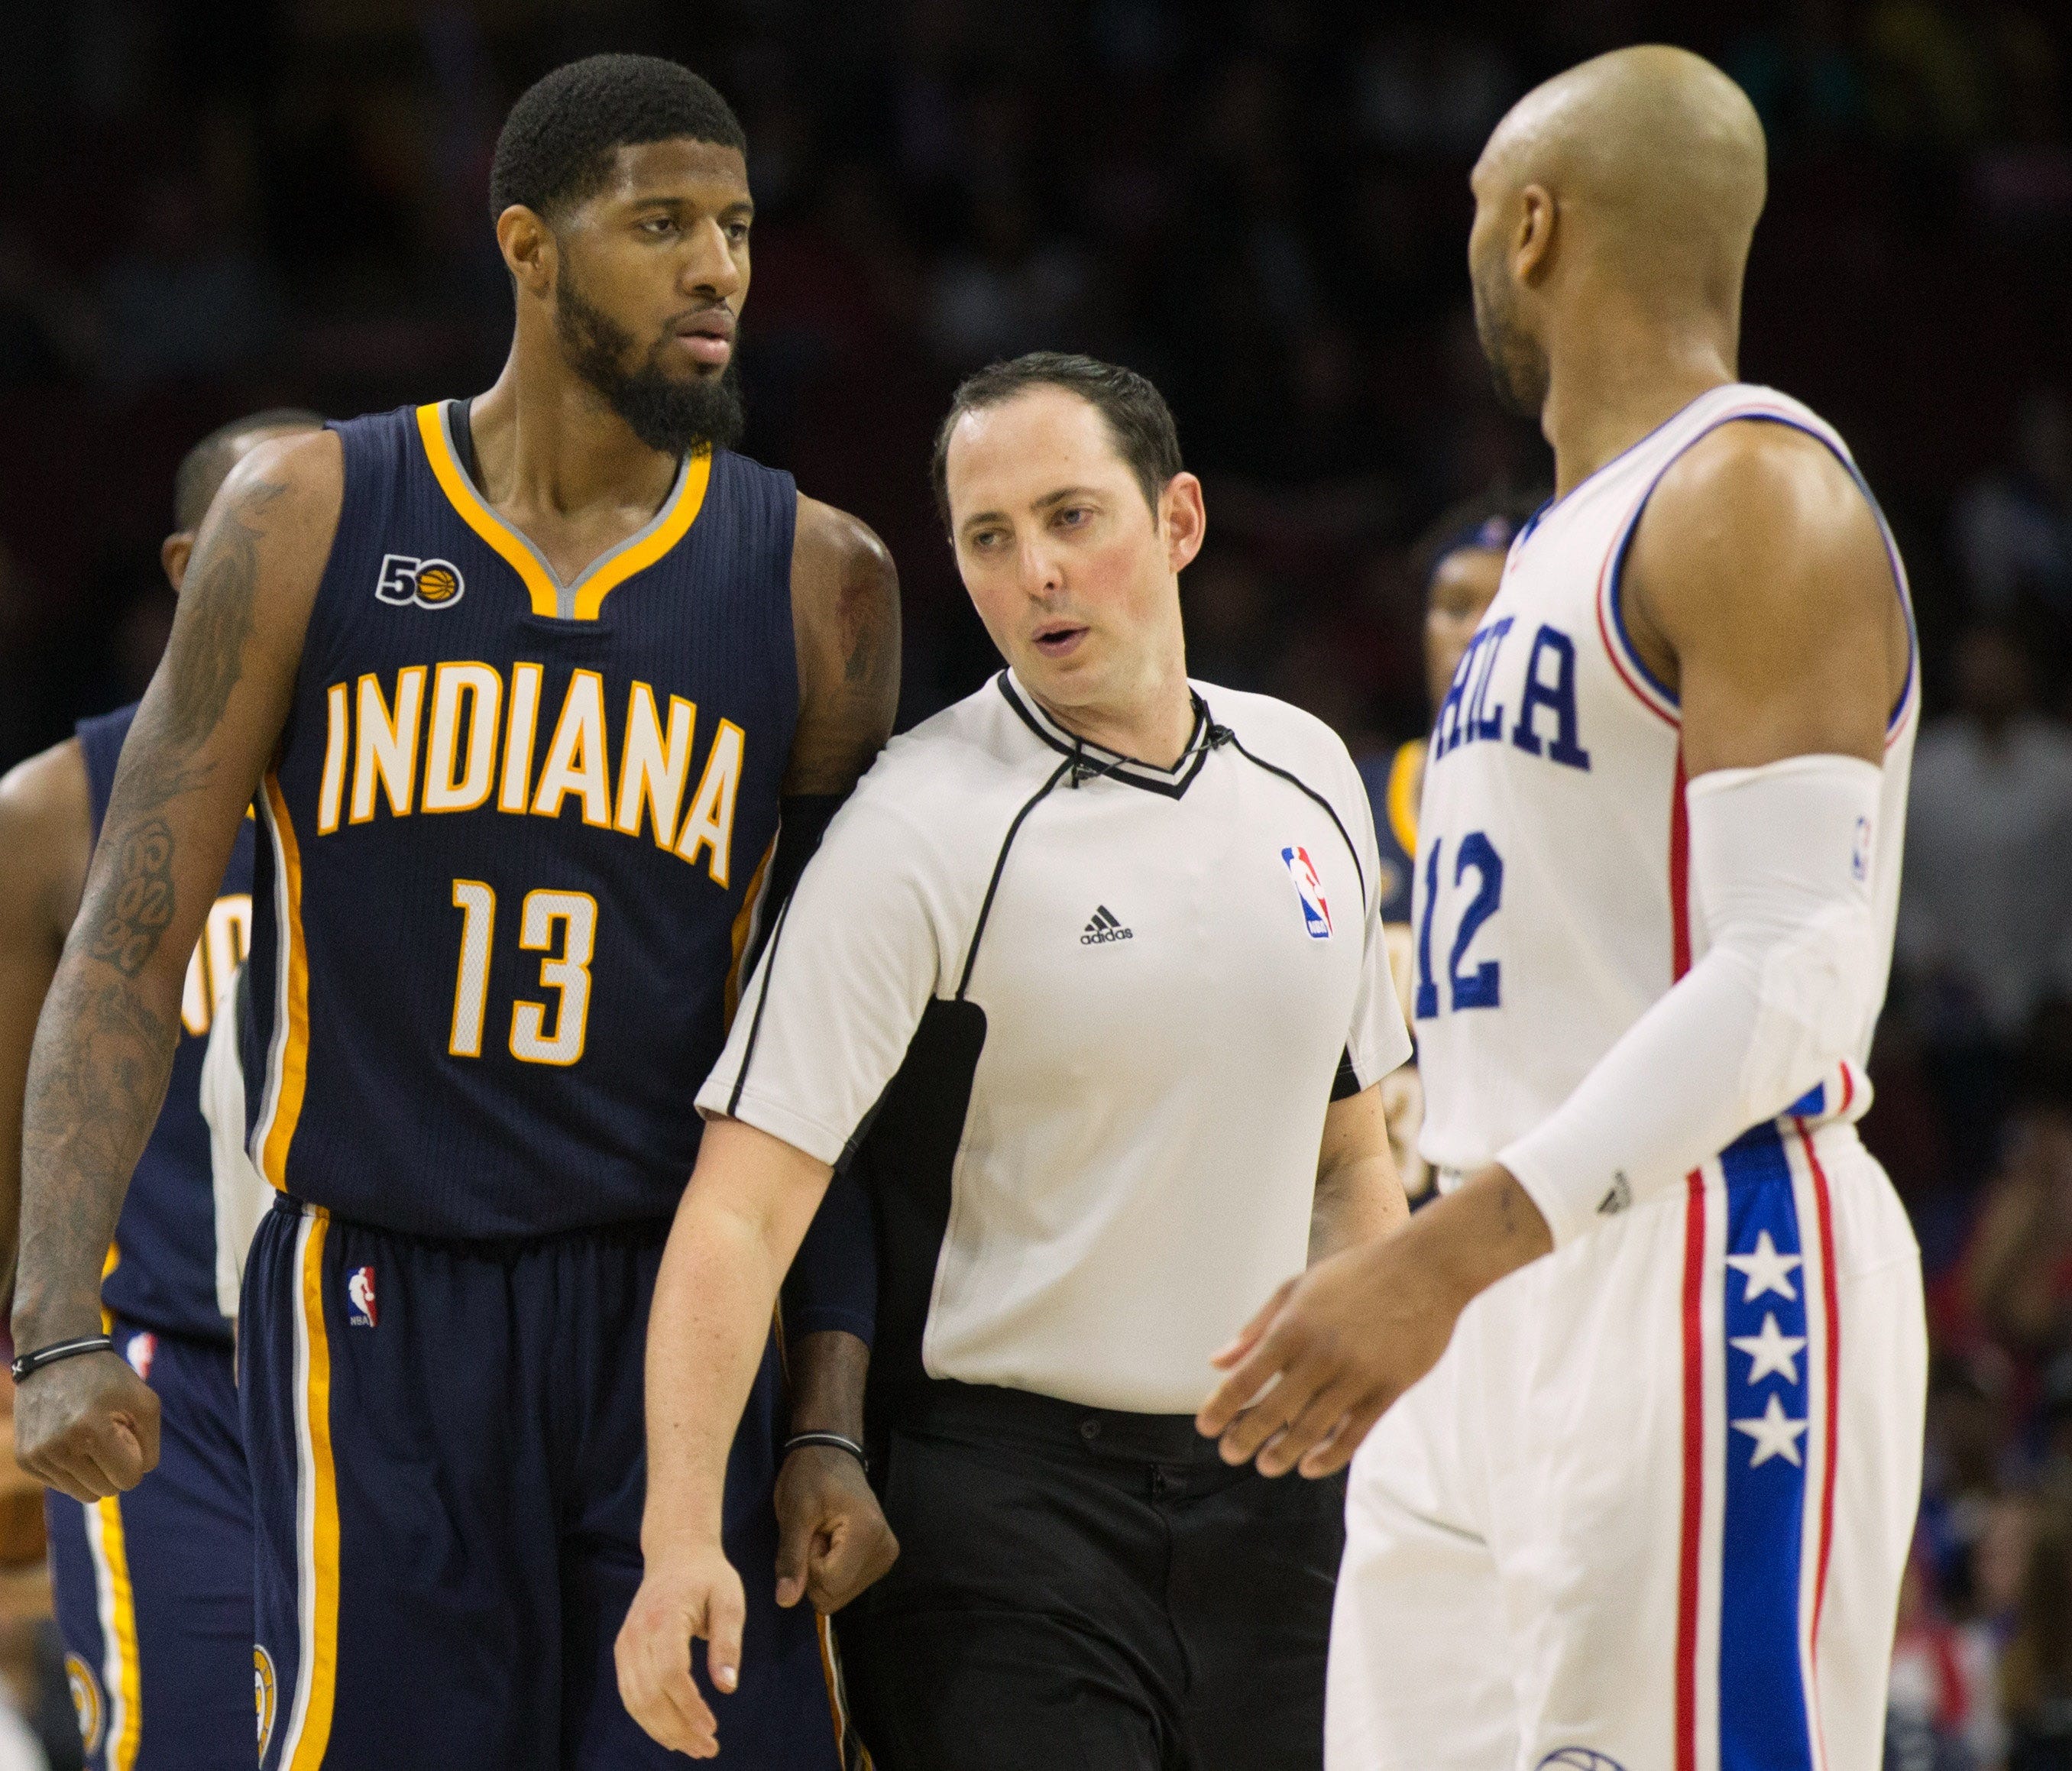 Paul George (13) and Gerald Henderson (12) were both ejected.